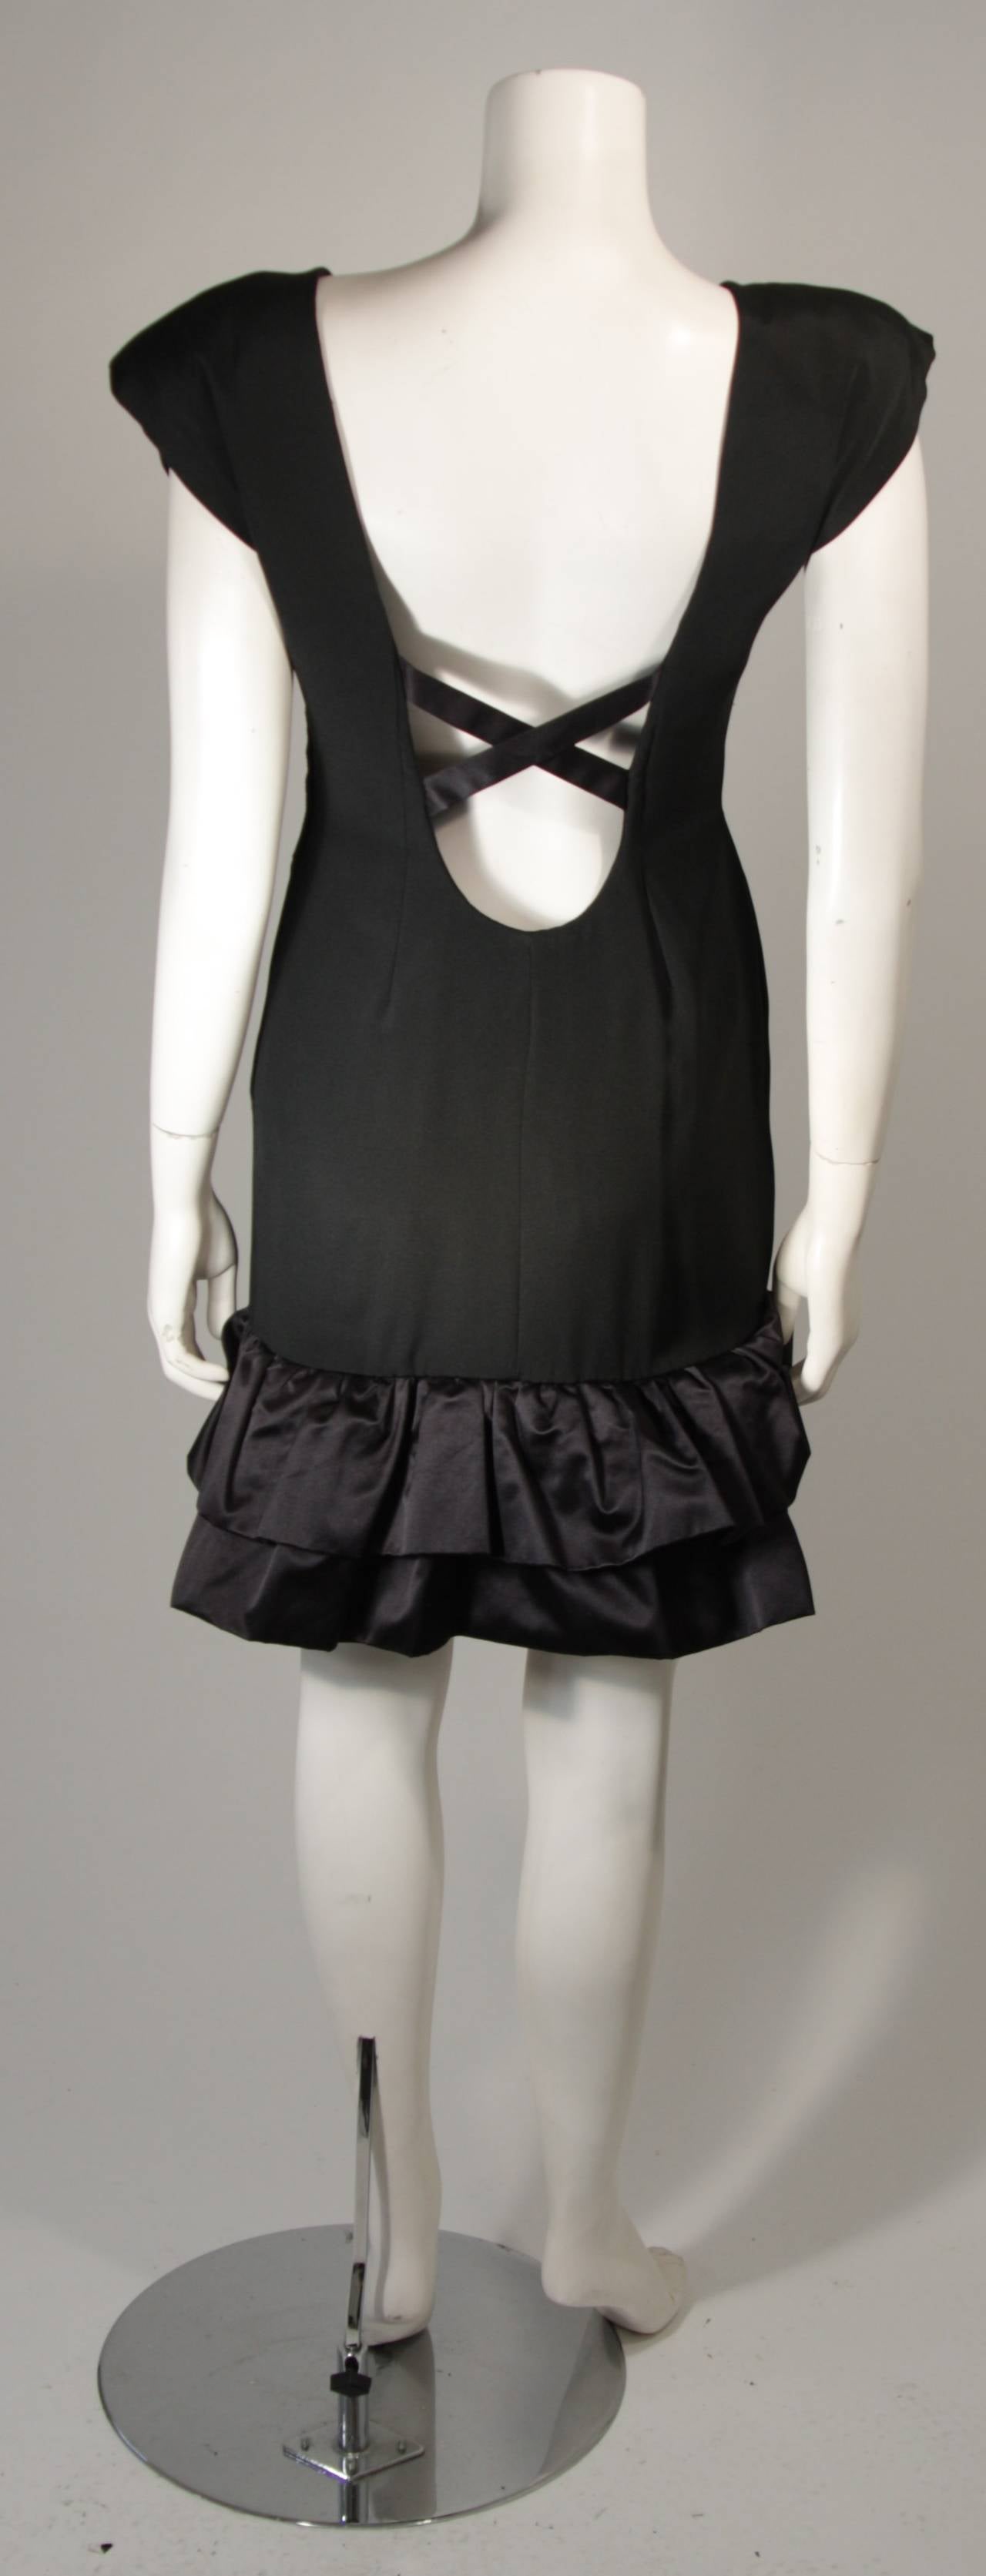 Vicky Tiel Black Silk Cocktail Dress with Criss Cross Back Size Small 4